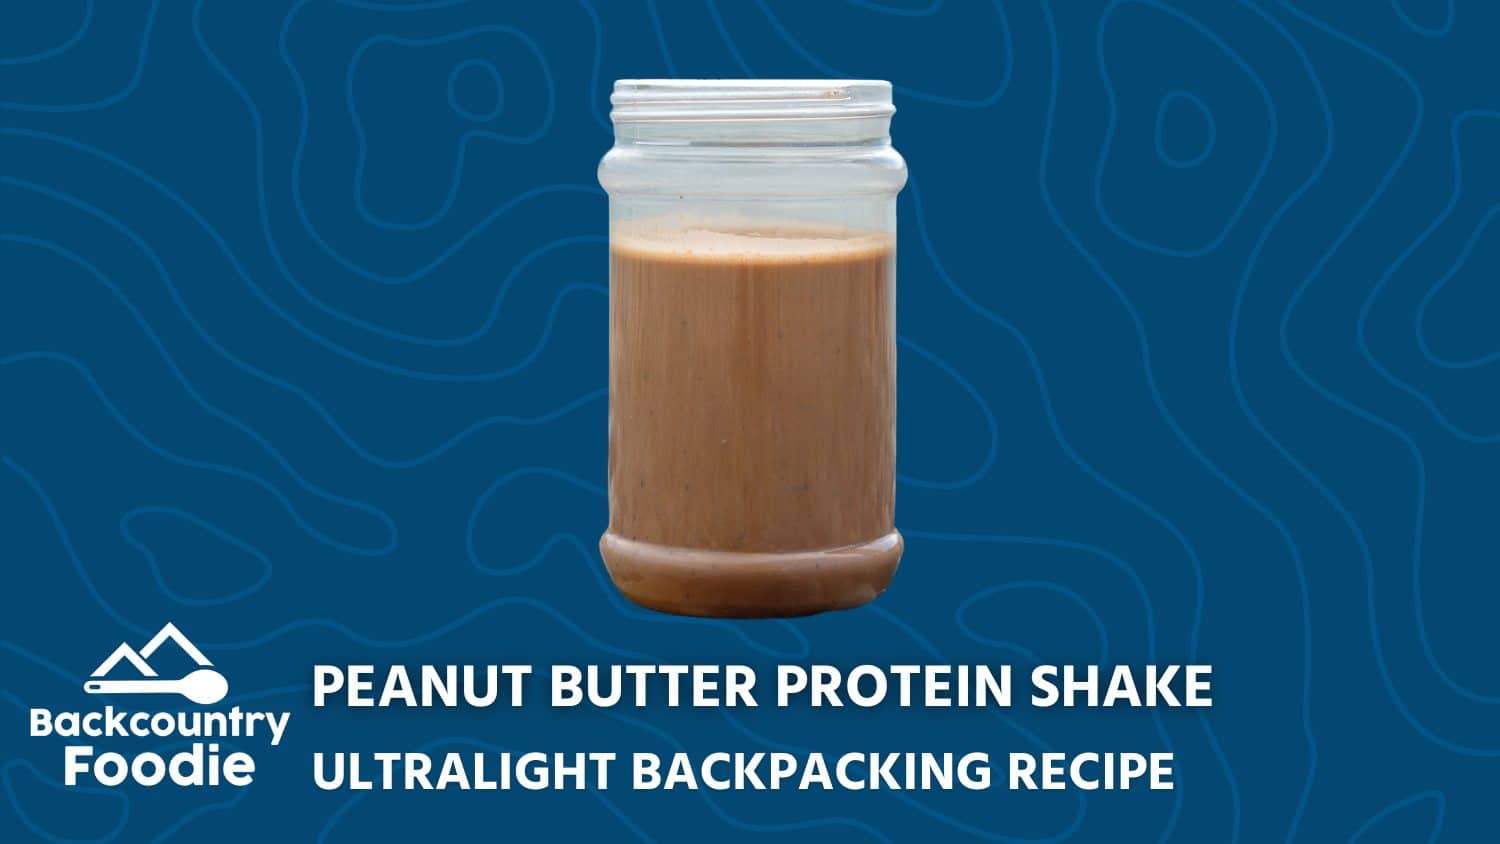 Backcountry Foodie Peanut Butter Protein Shake Ultralight Backpacking Recipe